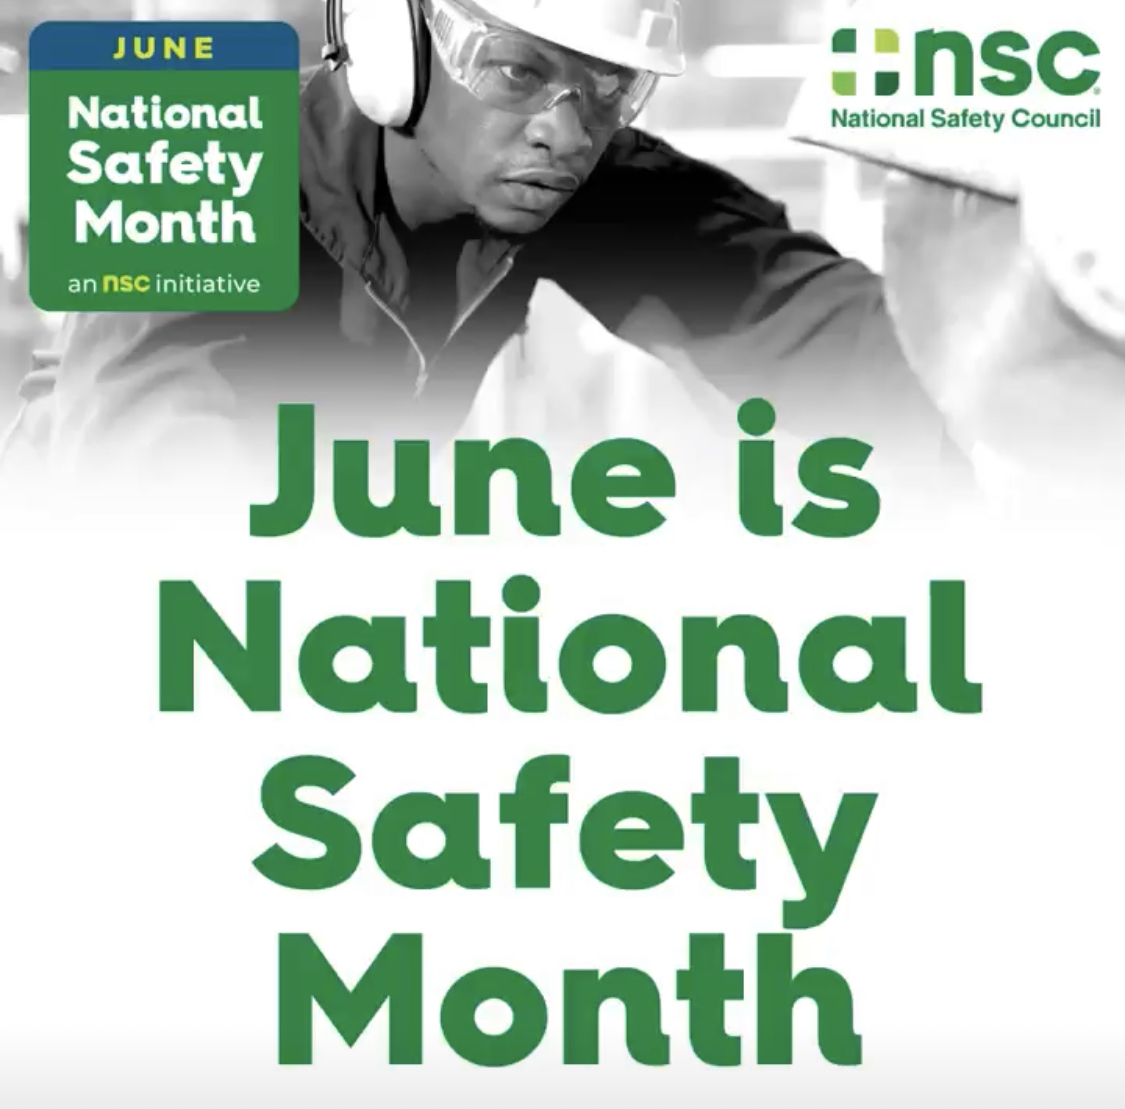 How can you commit to safety? Join GPS in observing National Safety Month this June! #safetyispersonal #gpssafetymonth